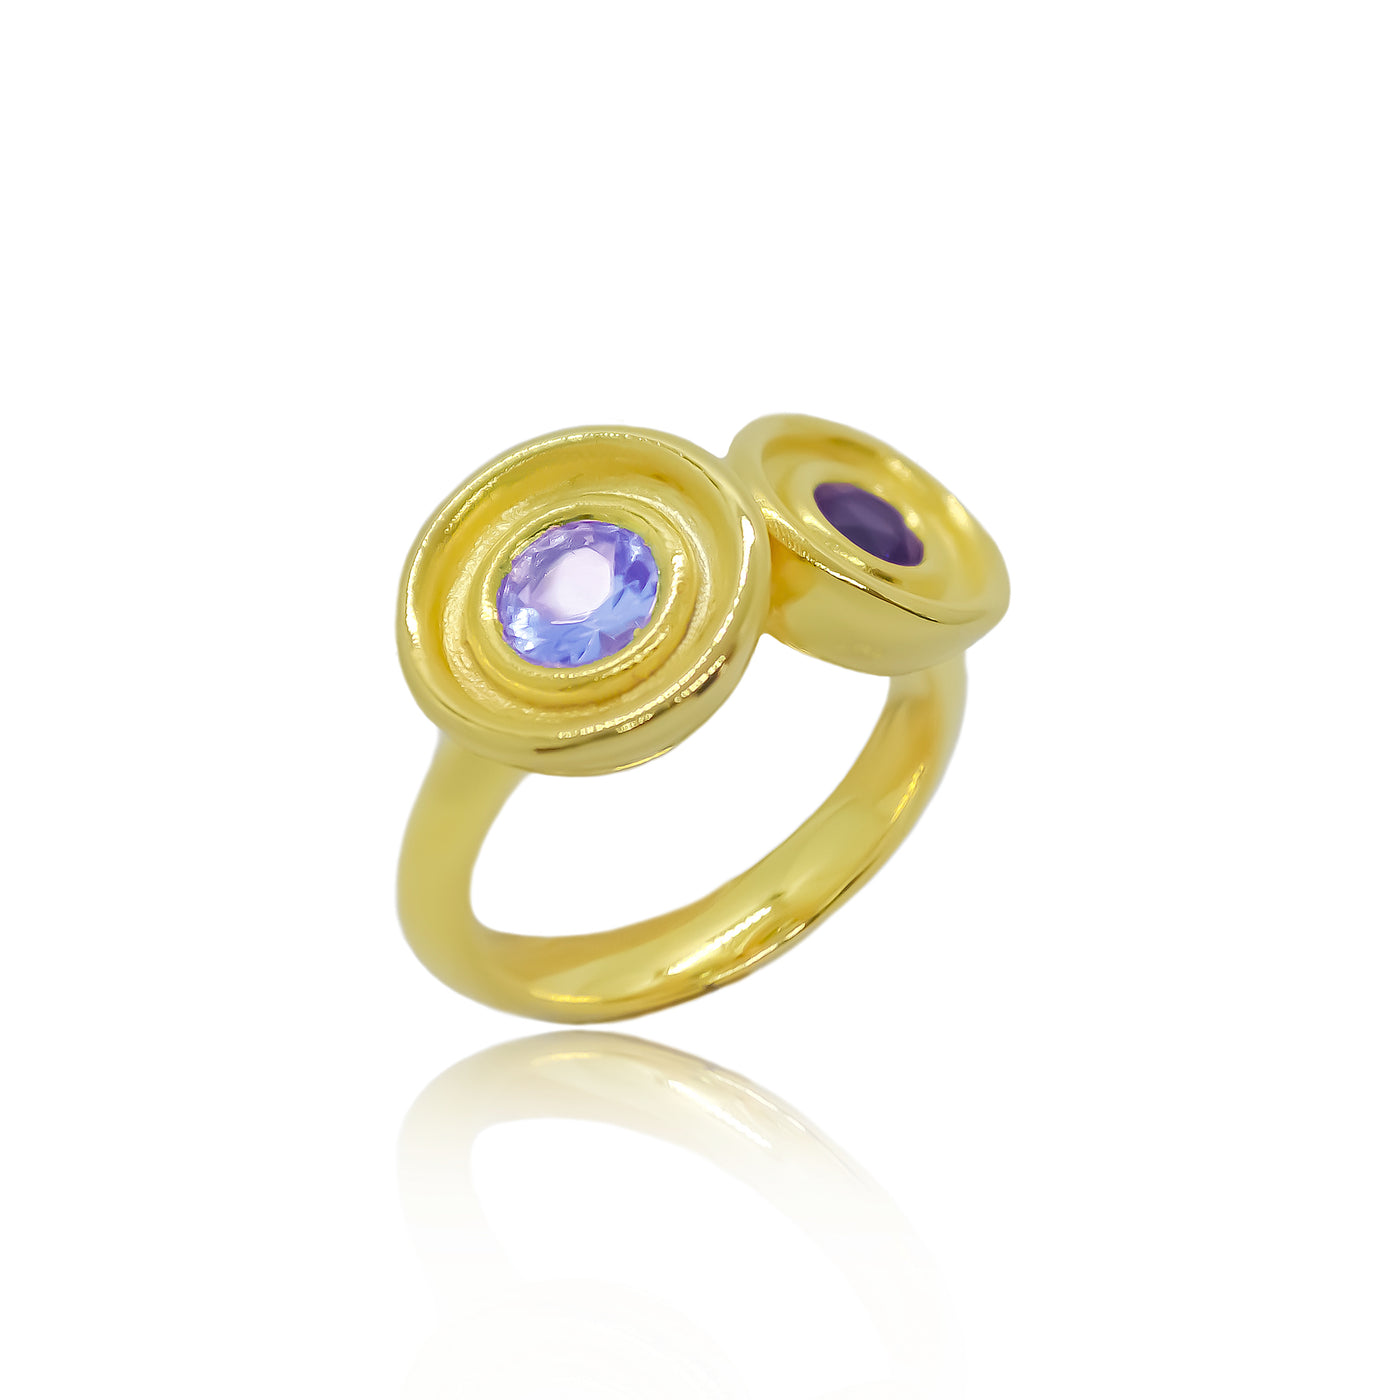 Gold cocktail ring with tanzanite and amethyst from Atelier ORMAN